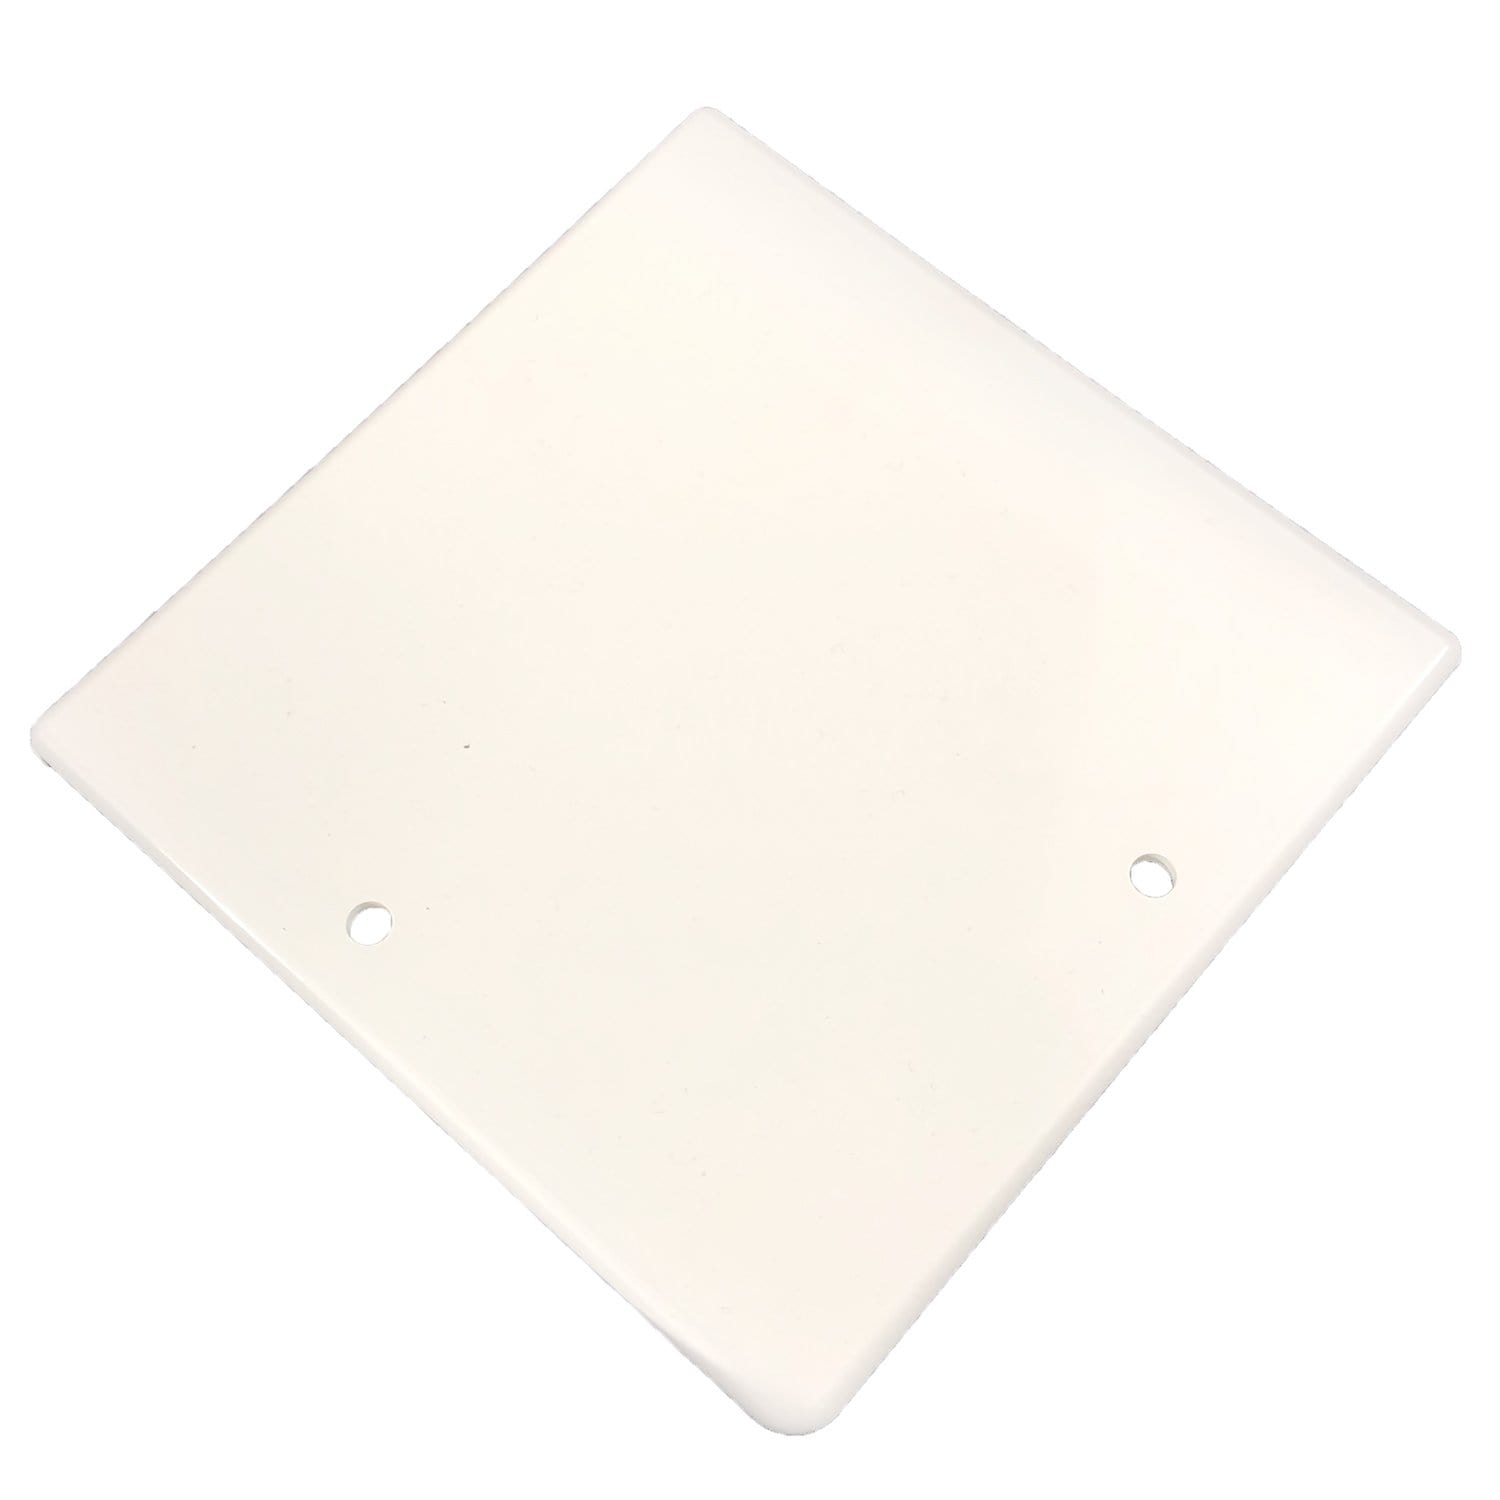 Thetford 94289 (601-022-94289) B & B Molders 4" Square Slide-Out Extrusion Cover, White